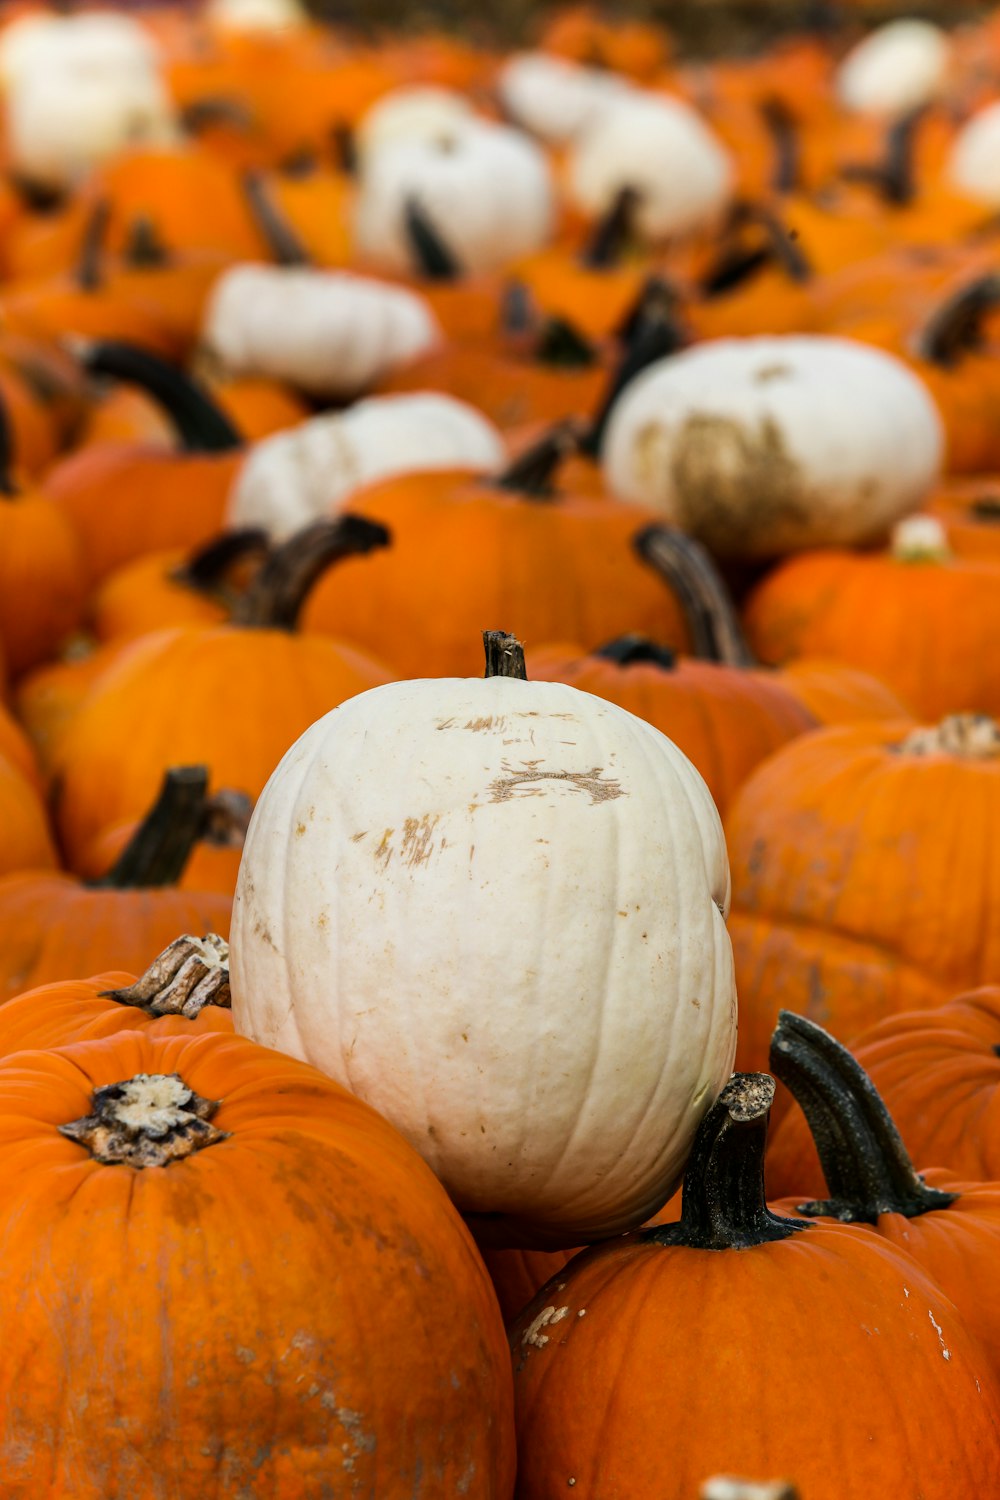 a large group of pumpkins sitting on top of each other